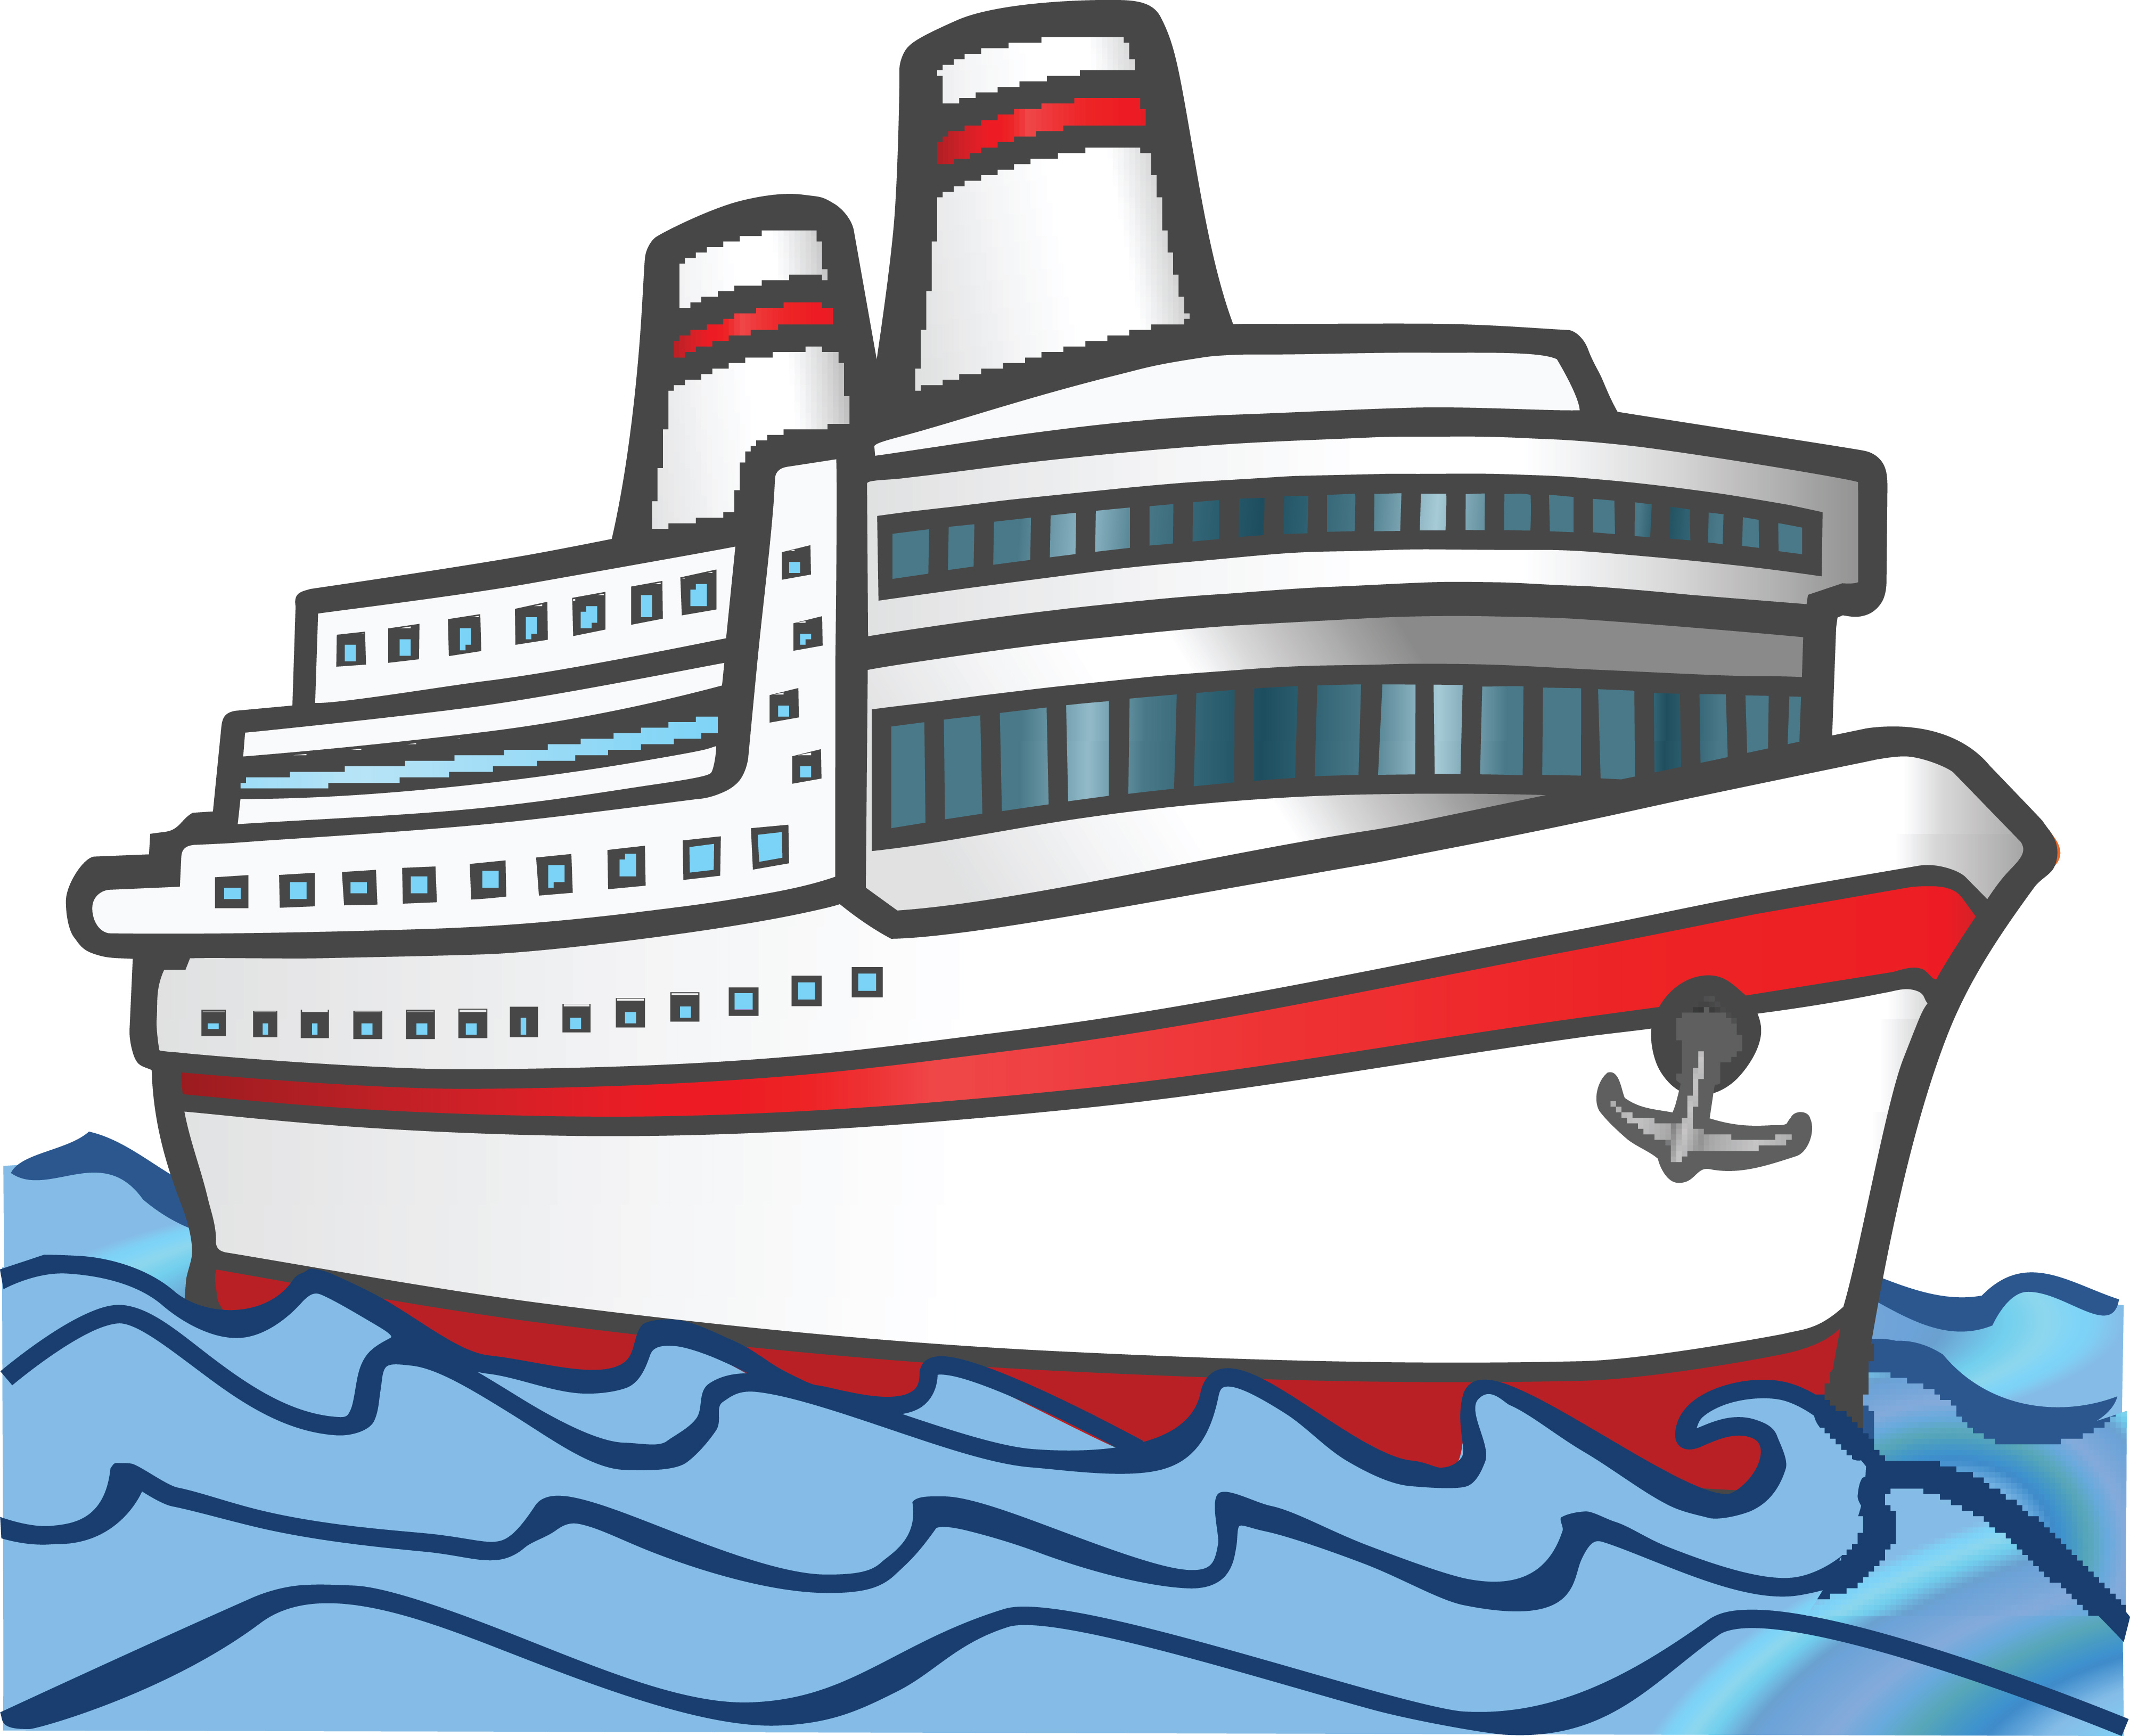 Free Clipart Of A cruise boat